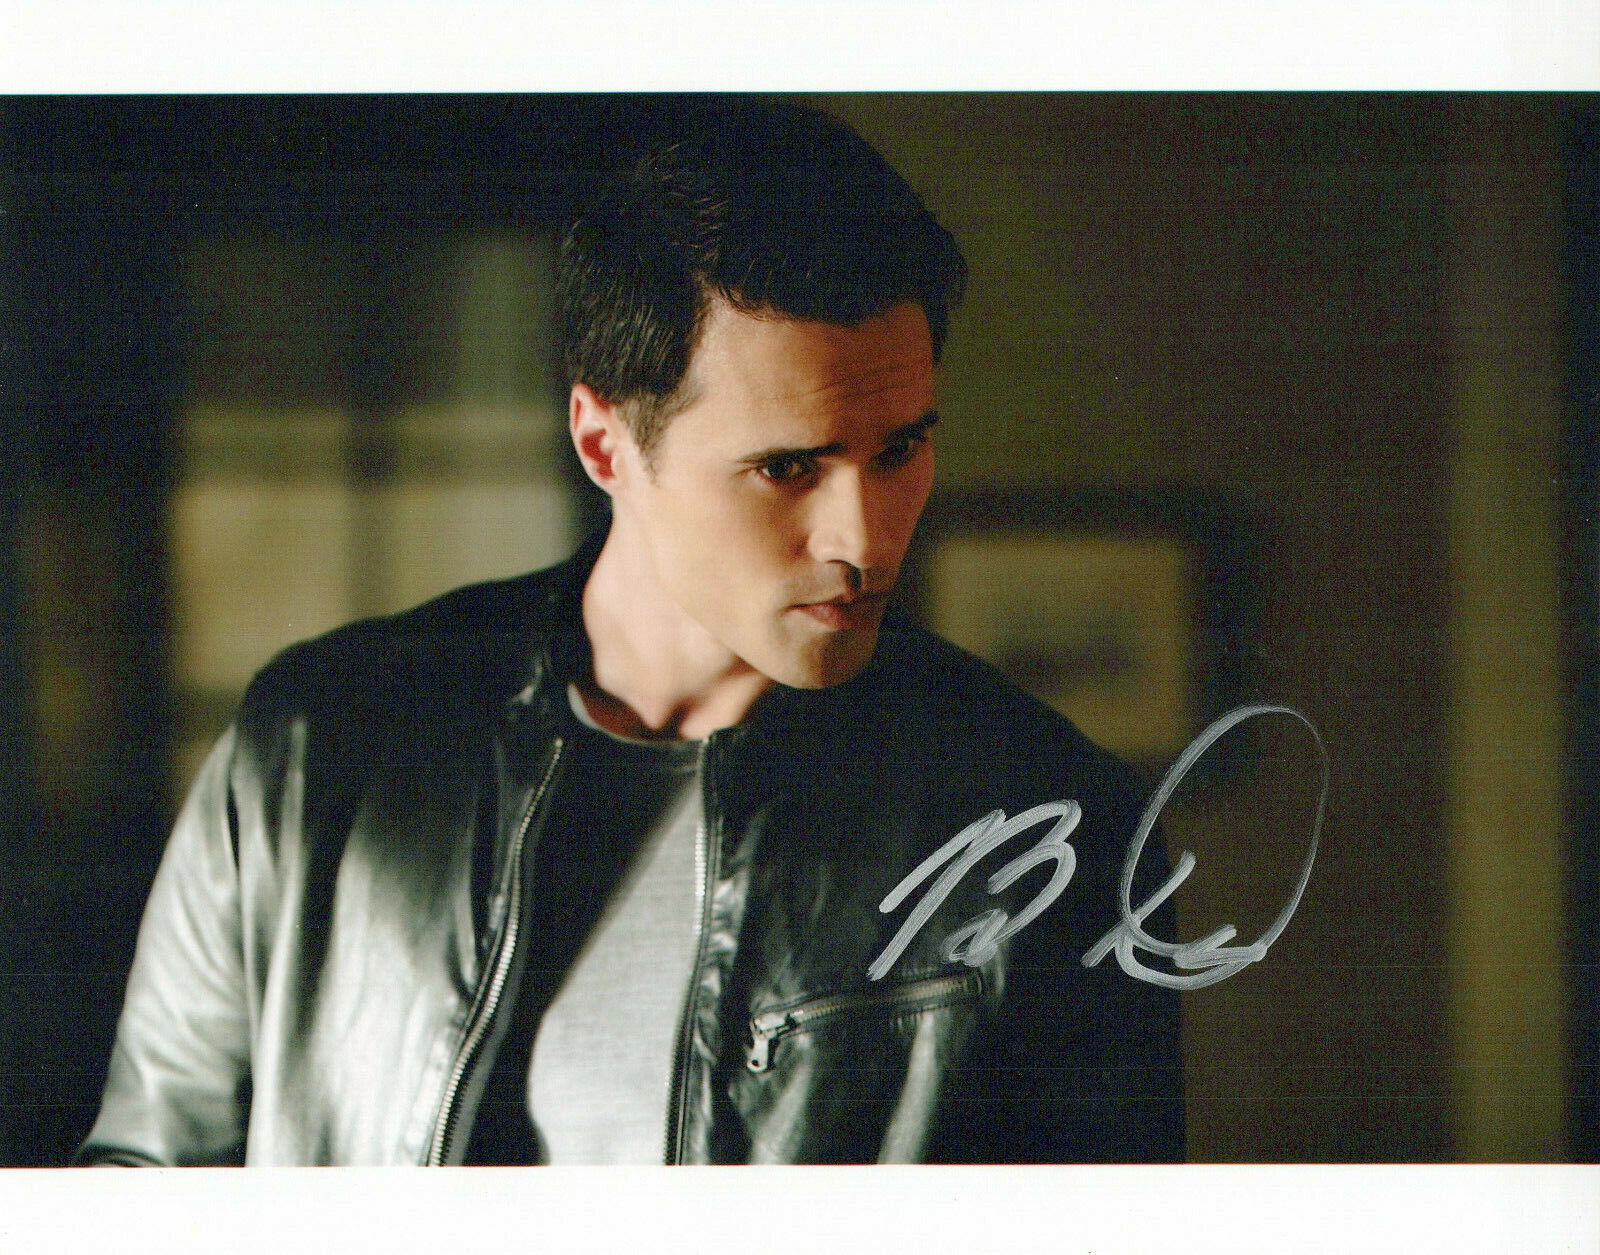 Brett Dalton Agents Of Shield autographed Photo Poster painting signed 8x10 #16 Grant Ward